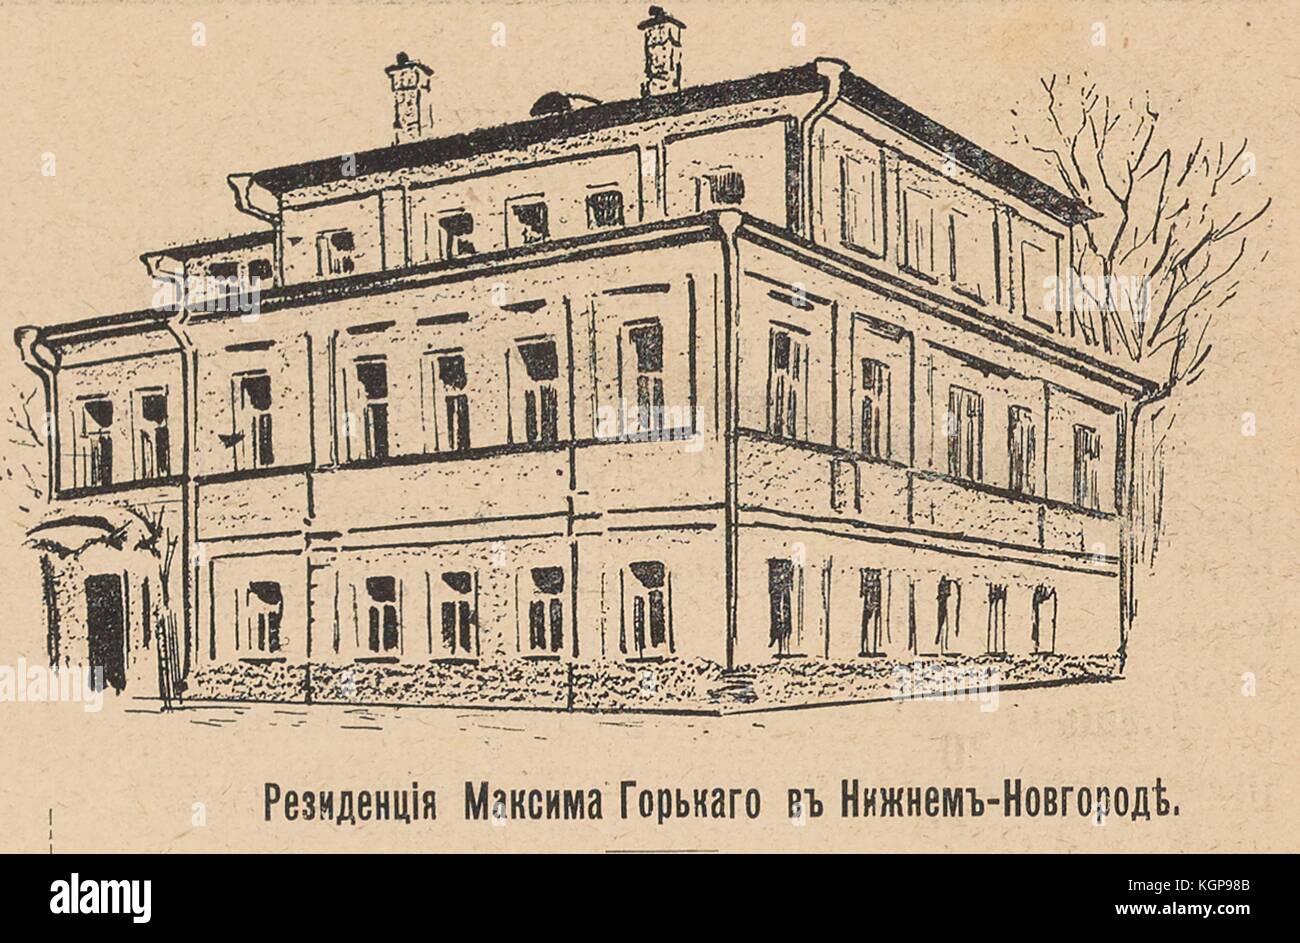 Illustration from the Russian satirical journal Bomby (Bombs) depicting a residential building, with text reading 'Residence of Maxim Gorky in Nizhny Novgorod', referring to a famous Russian writer and political activist in the early 20th century, 1905. Stock Photo